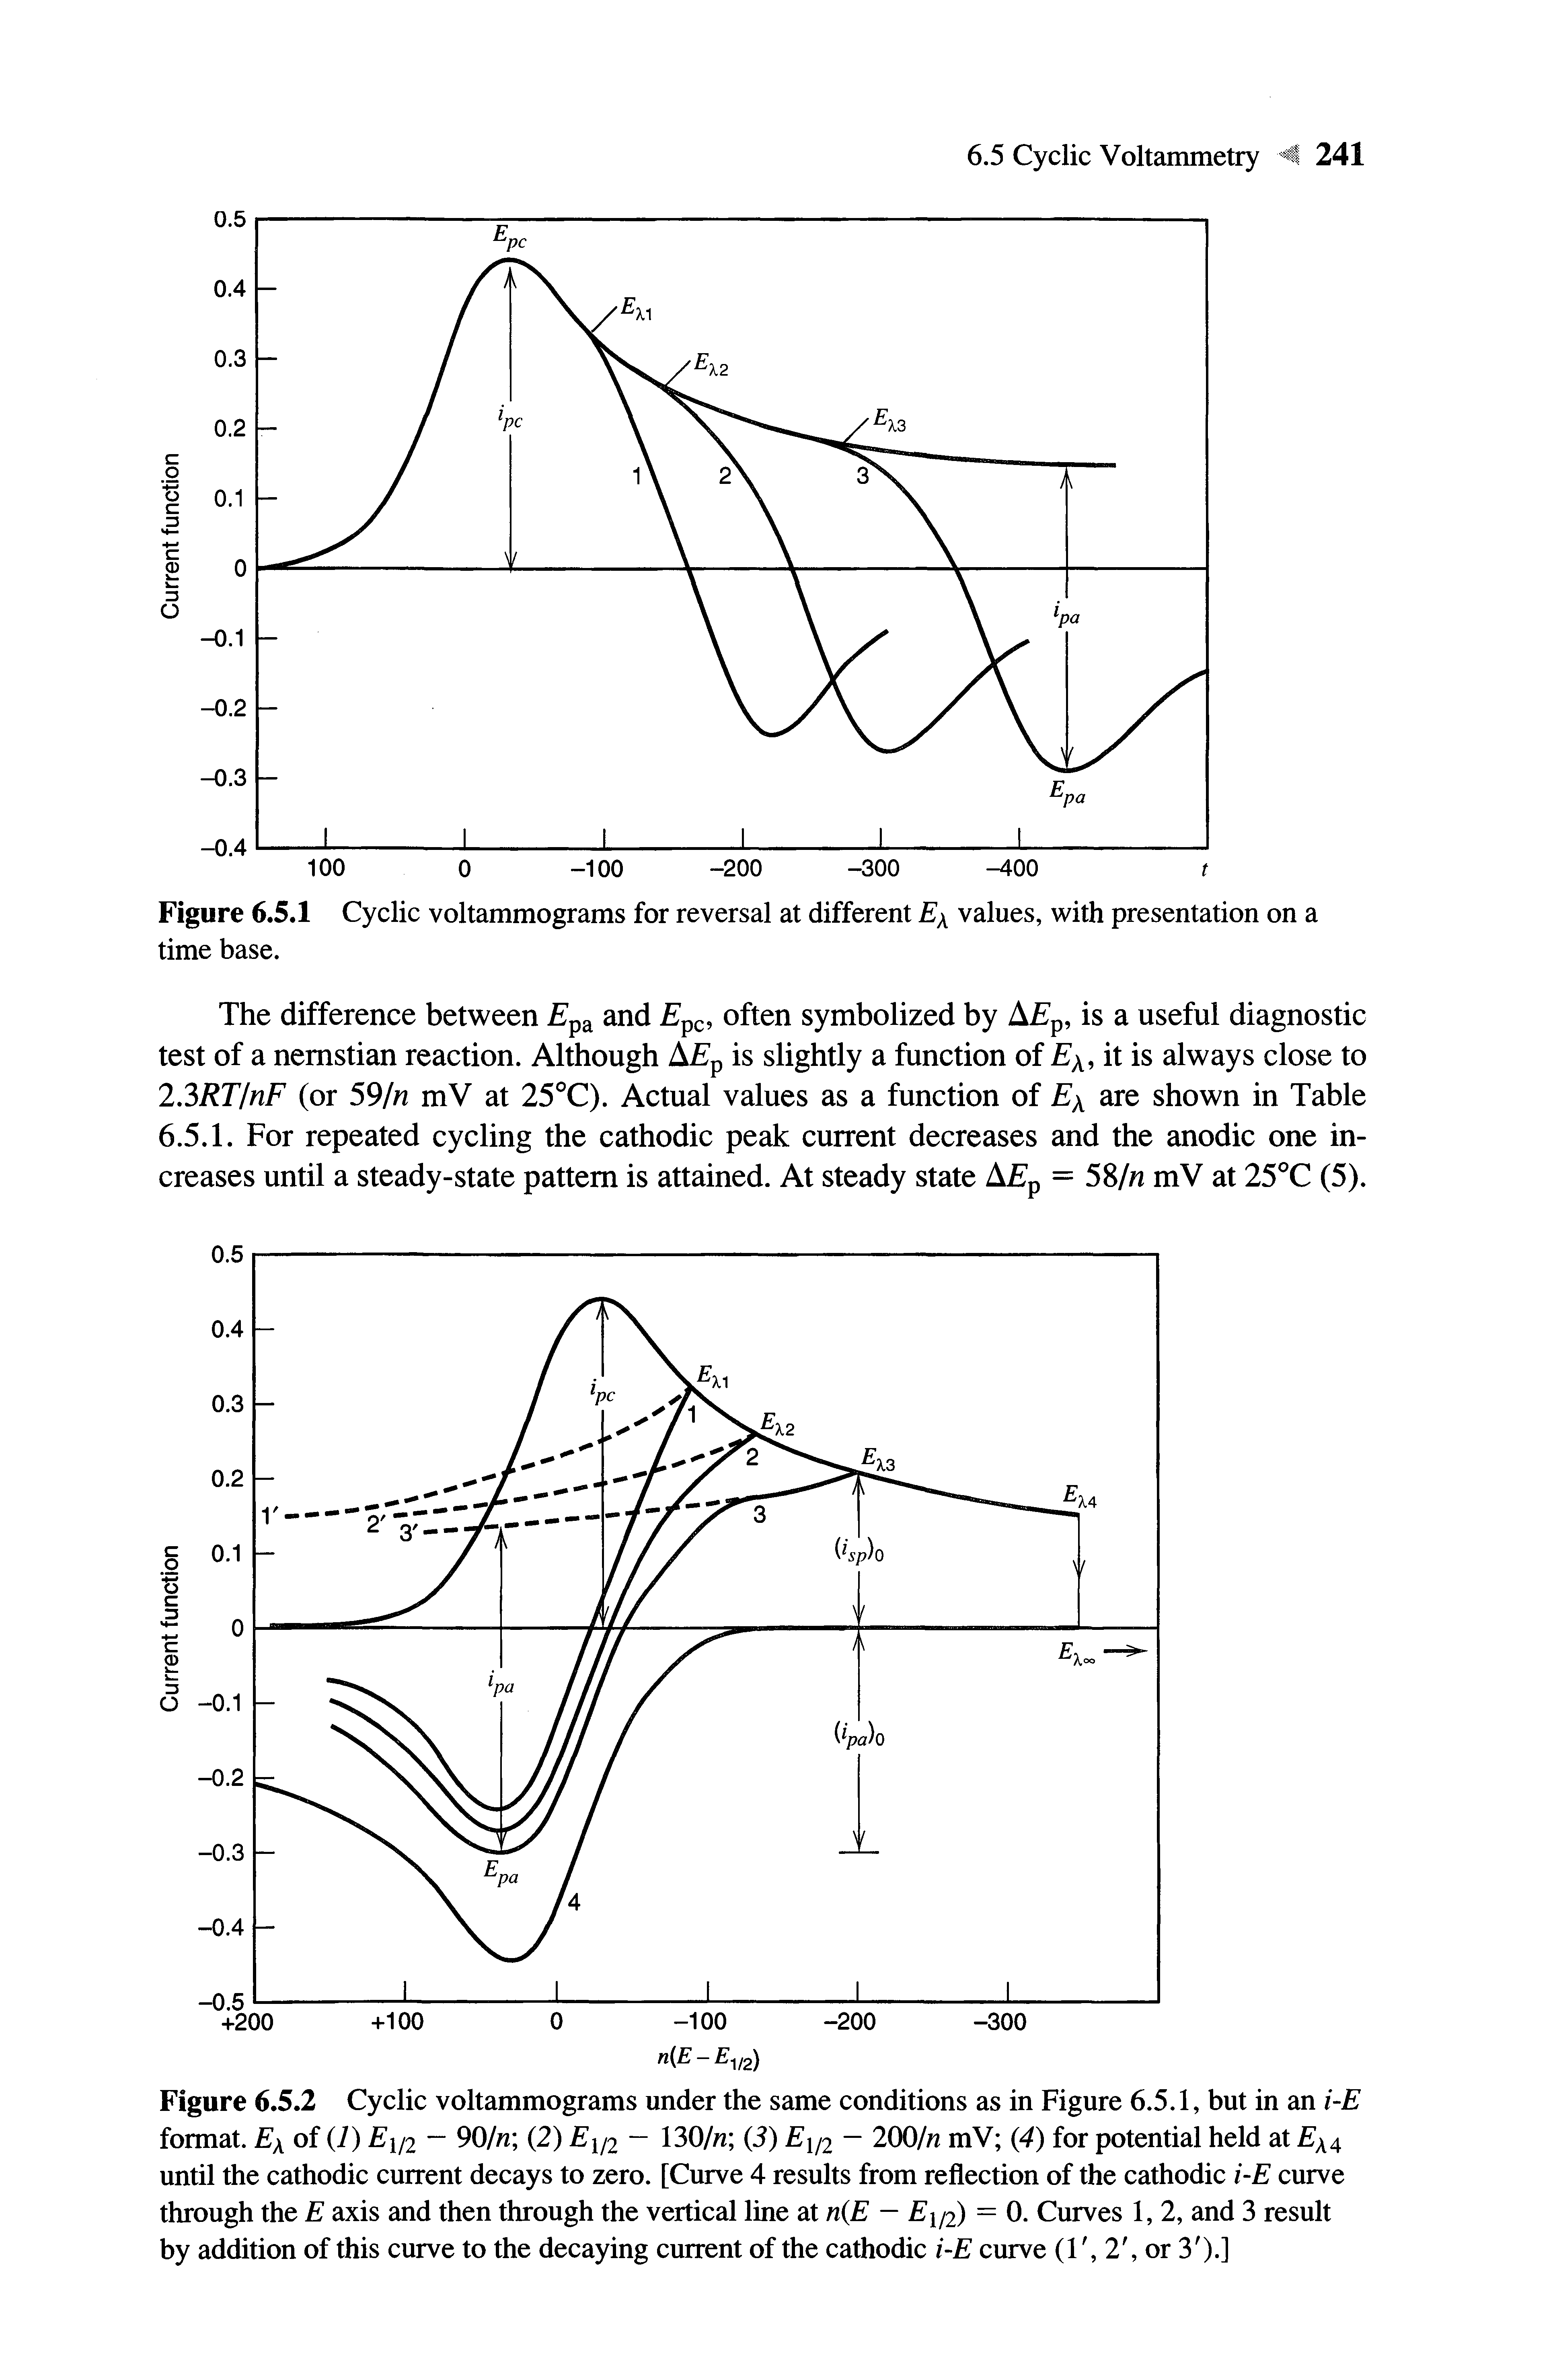 Figure 6.5.2 Cyclic voltammograms under the same conditions as in Figure 6.5.1, but in an i-E format. E of (1) E1/2 — 90/n (2) E1/2 — 130/n (3) Ey2 - 200/n mV (4) for potential held at E 4 until the cathodic current decays to zero. [Curve 4 results from reflection of the cathodic i-E curve through the E axis and then through the vertical line at n E — F1/2) = 0. Curves 1, 2, and 3 result by addition of this curve to the decaying current of the cathodic i-E curve (1, 2, or 3 )-]...